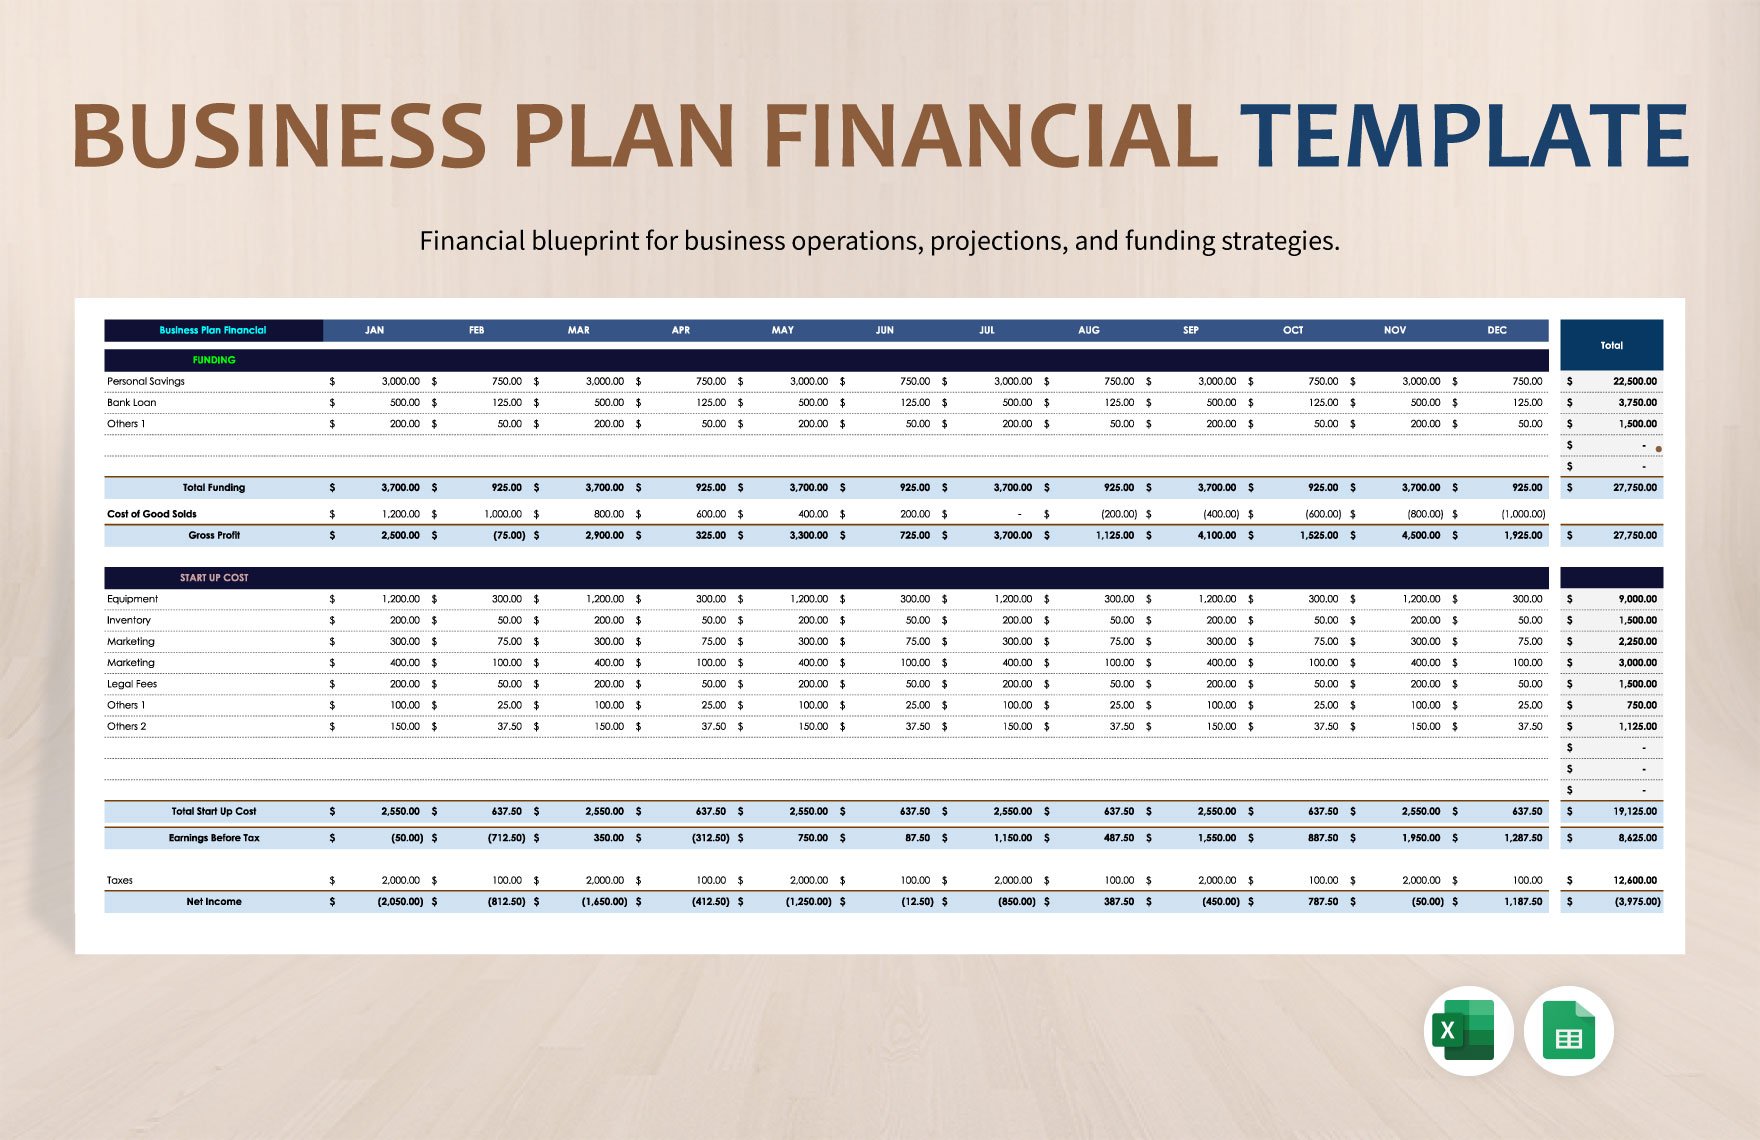 Business Plan Financial Template in Excel, Google Sheets